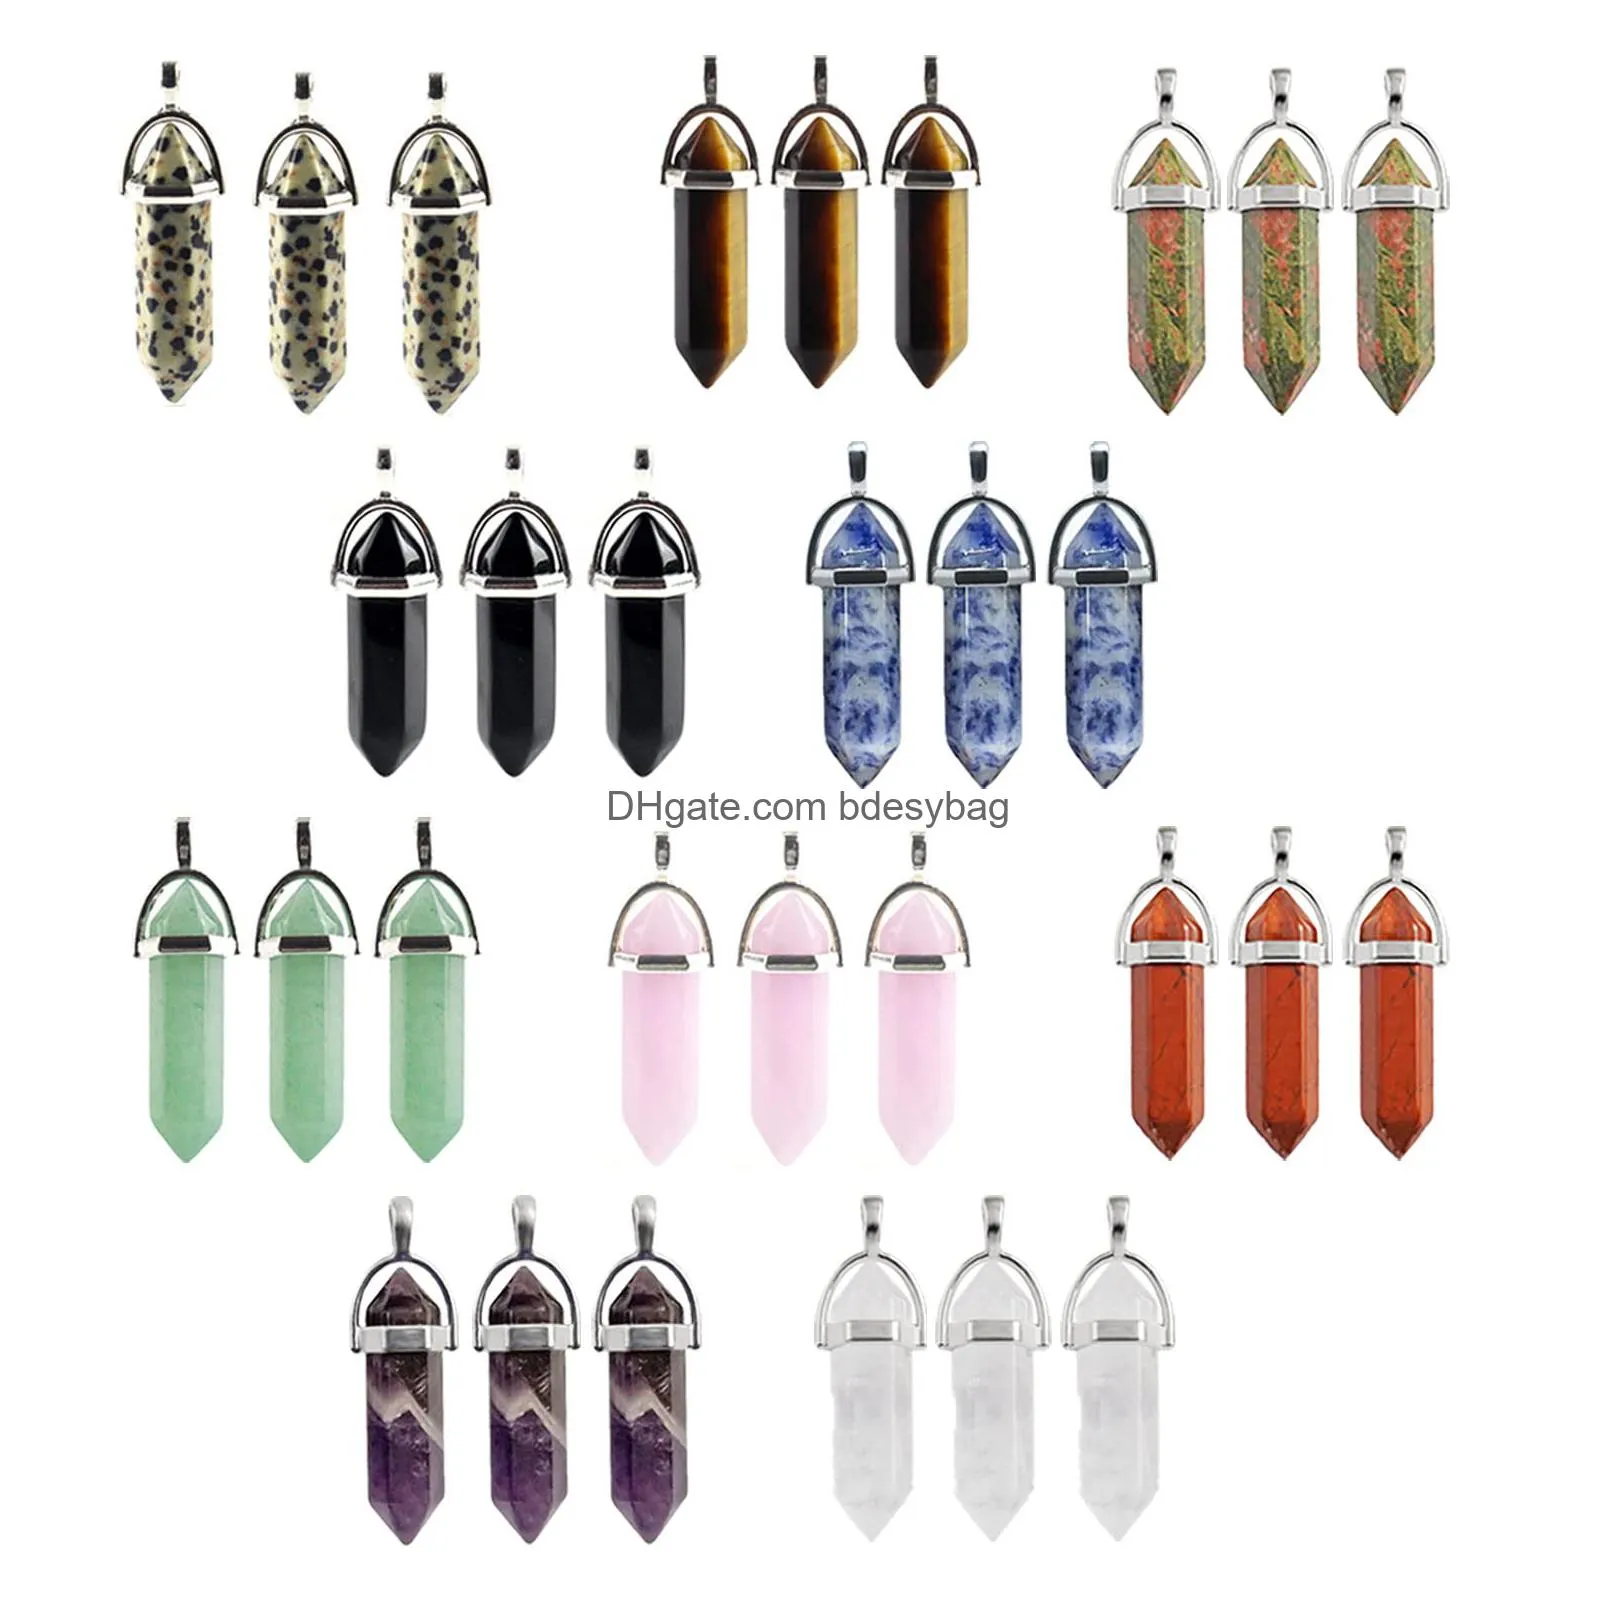 hexagonal chakra pendant bullet shape crystal pendant healing pointed quartz charms gemstone natural prism stone chakra beads for diy necklace earrings bracelet jewelry making 10 colors